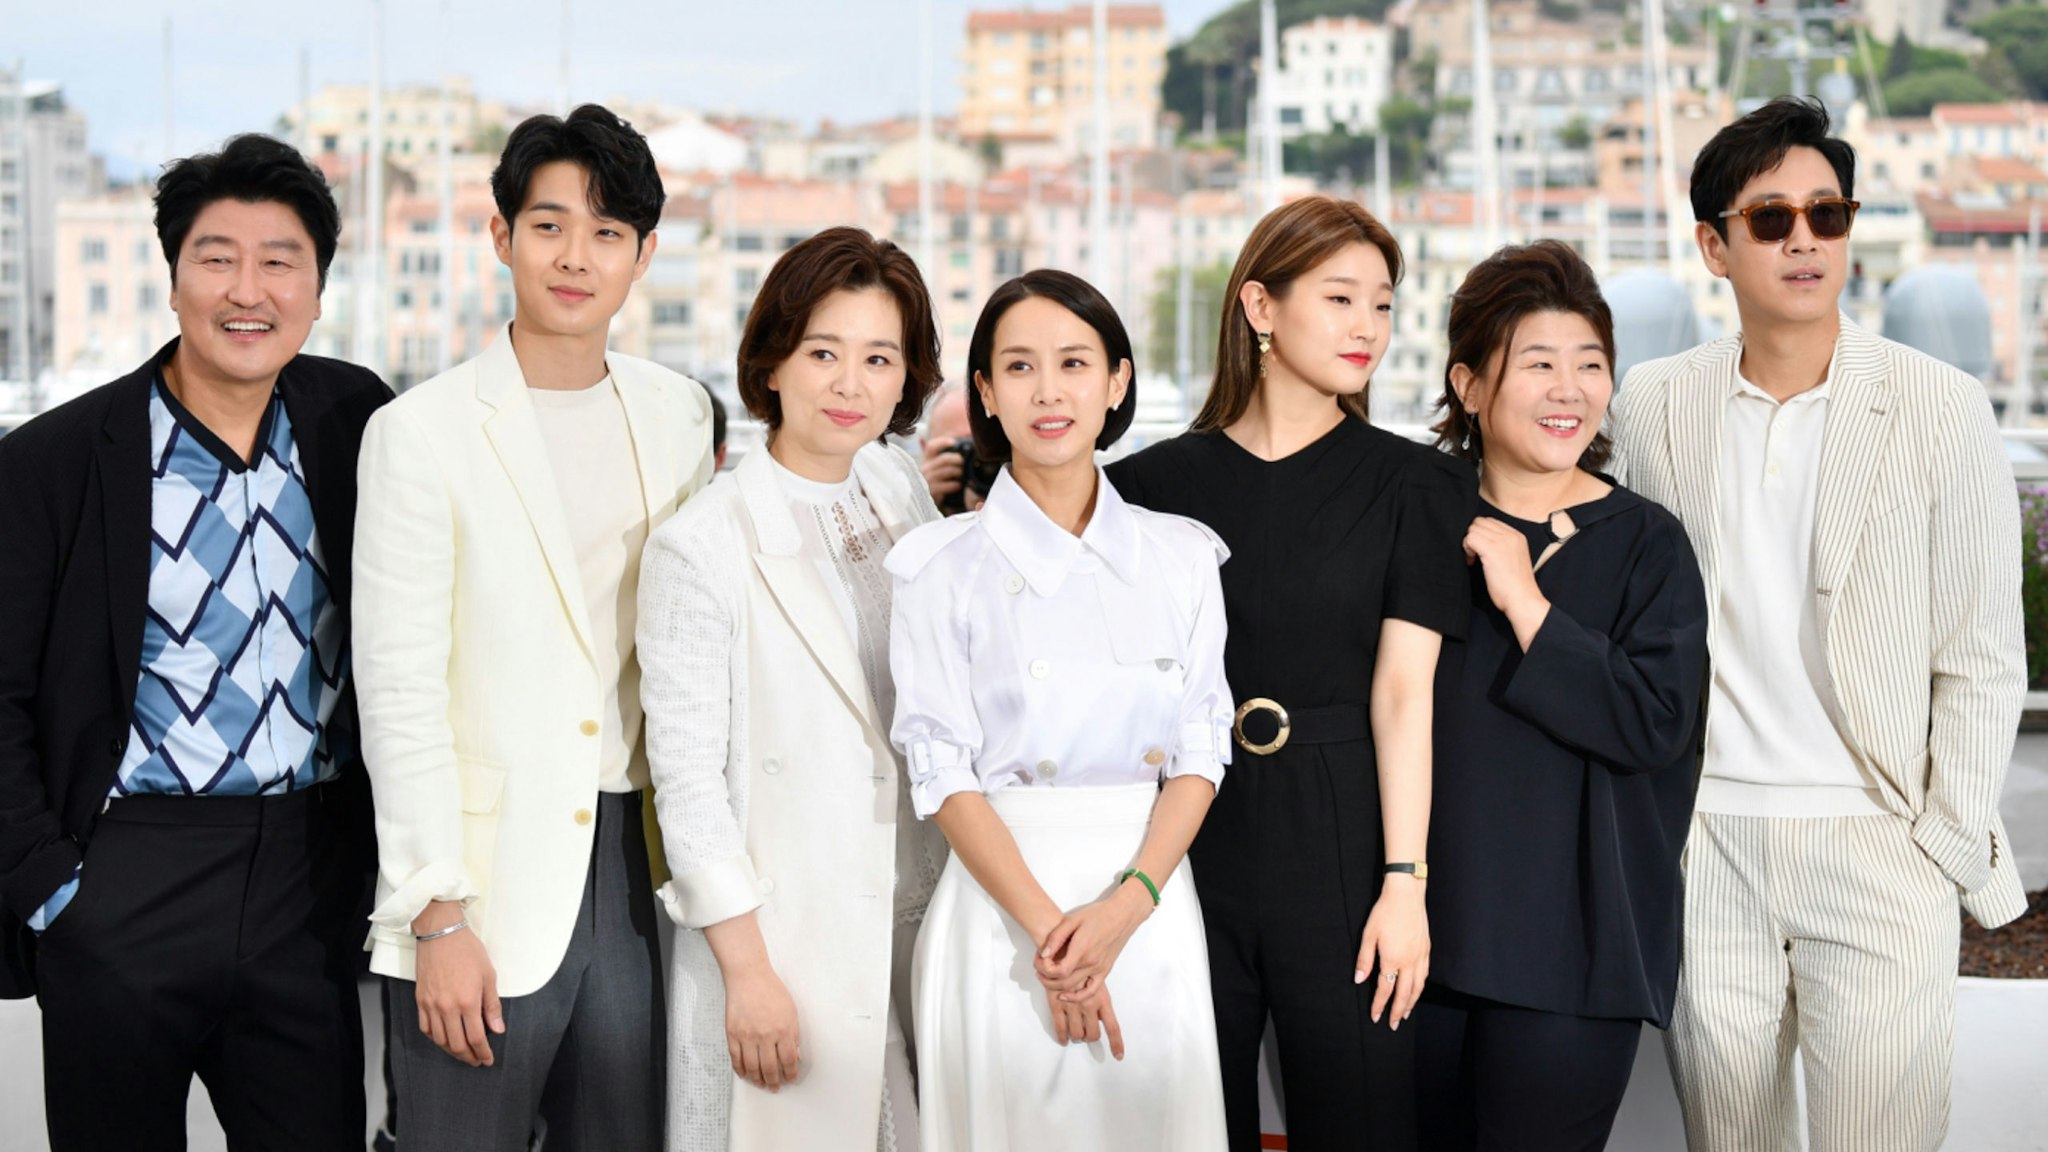 South Korean actor Kang-ho Song, South Korean actor Choi Woo-shik, South korean actress Chang Hyae-jin, South Korean actress Cho Yeo-jeong, South Korean actress Park So-dam, South Korean actress Lee Jung-Eun and South Korean actor Lee Sun-kyun pose during a photocall for the film "Parasite (Gisaengchung)" at the 72nd edition of the Cannes Film Festival in Cannes, southern France, on May 22, 2019.